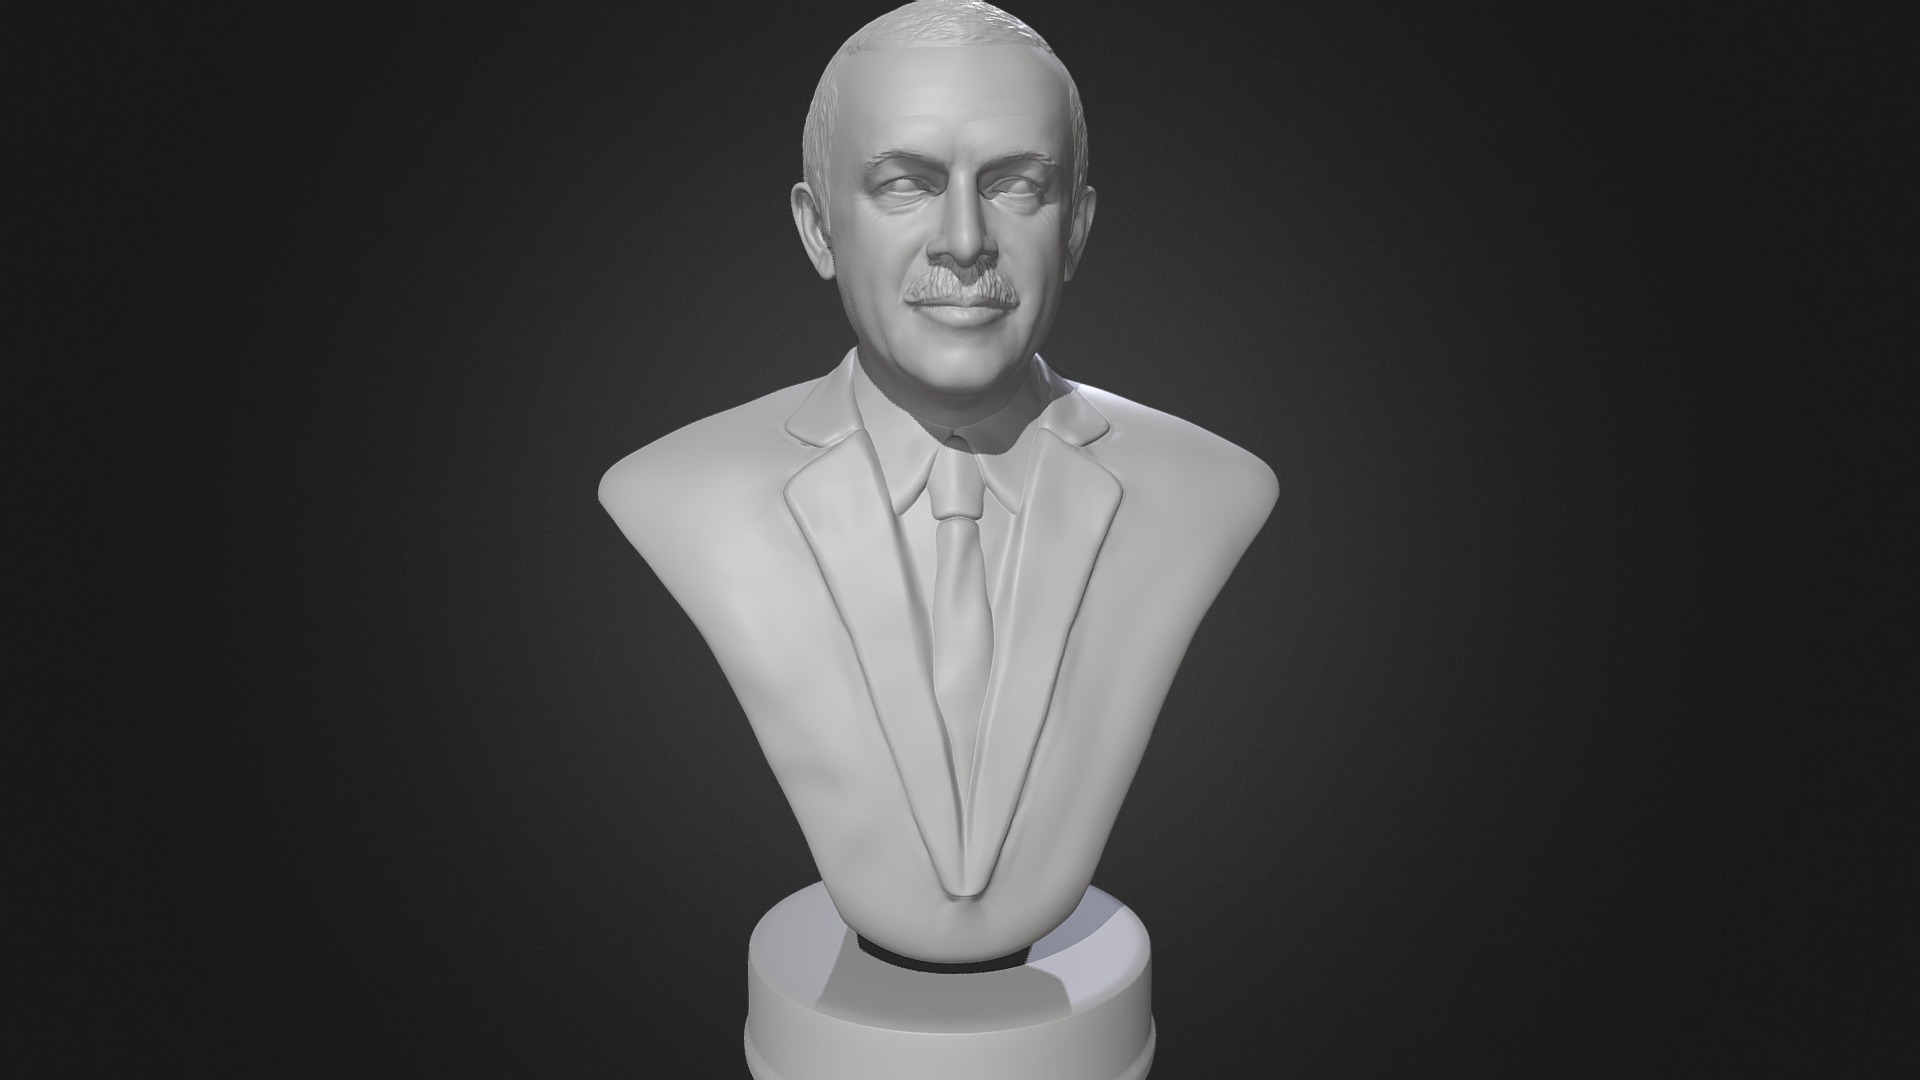 3D model Recep Tayyip Erdogan 3D printable portrait bust - This is a 3D model of the Recep Tayyip Erdogan 3D printable portrait bust. The 3D model is about a statue of a person.